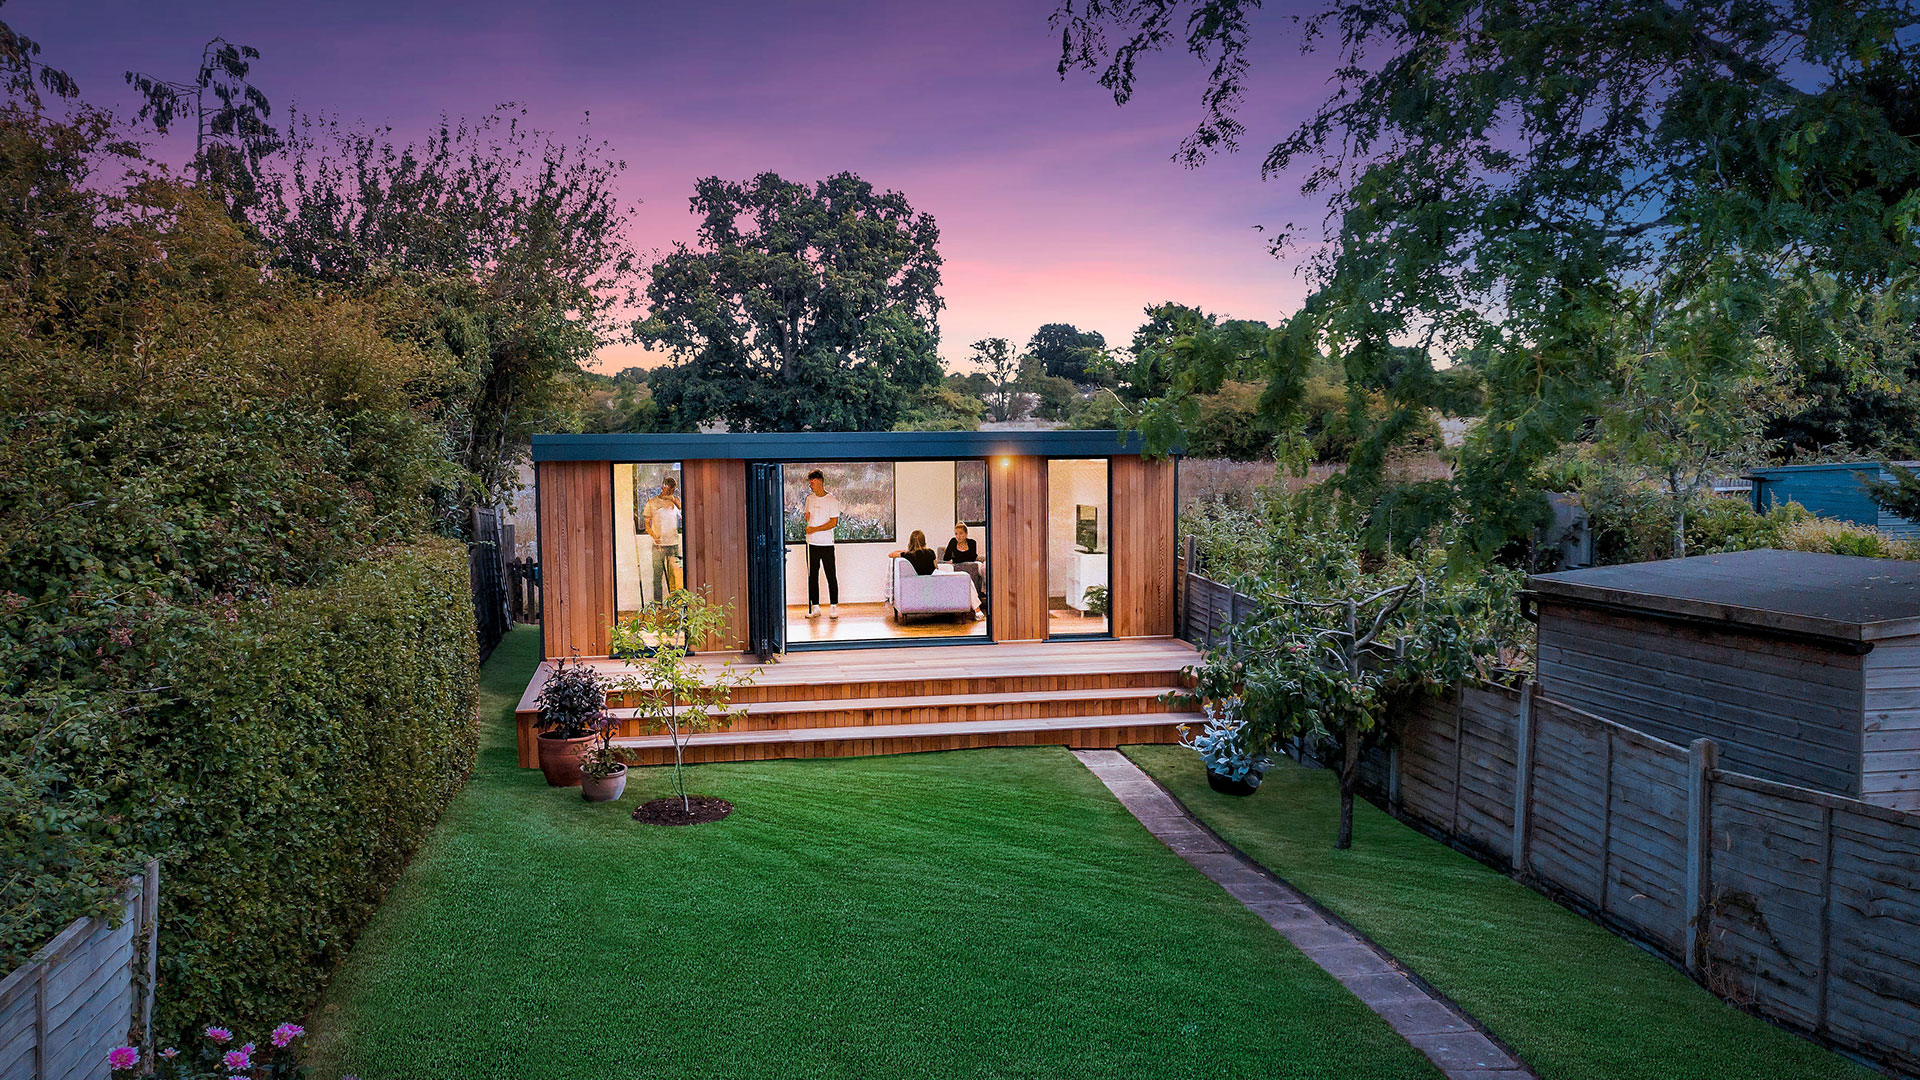 5 reasons why garden rooms are the perfect addition to your home